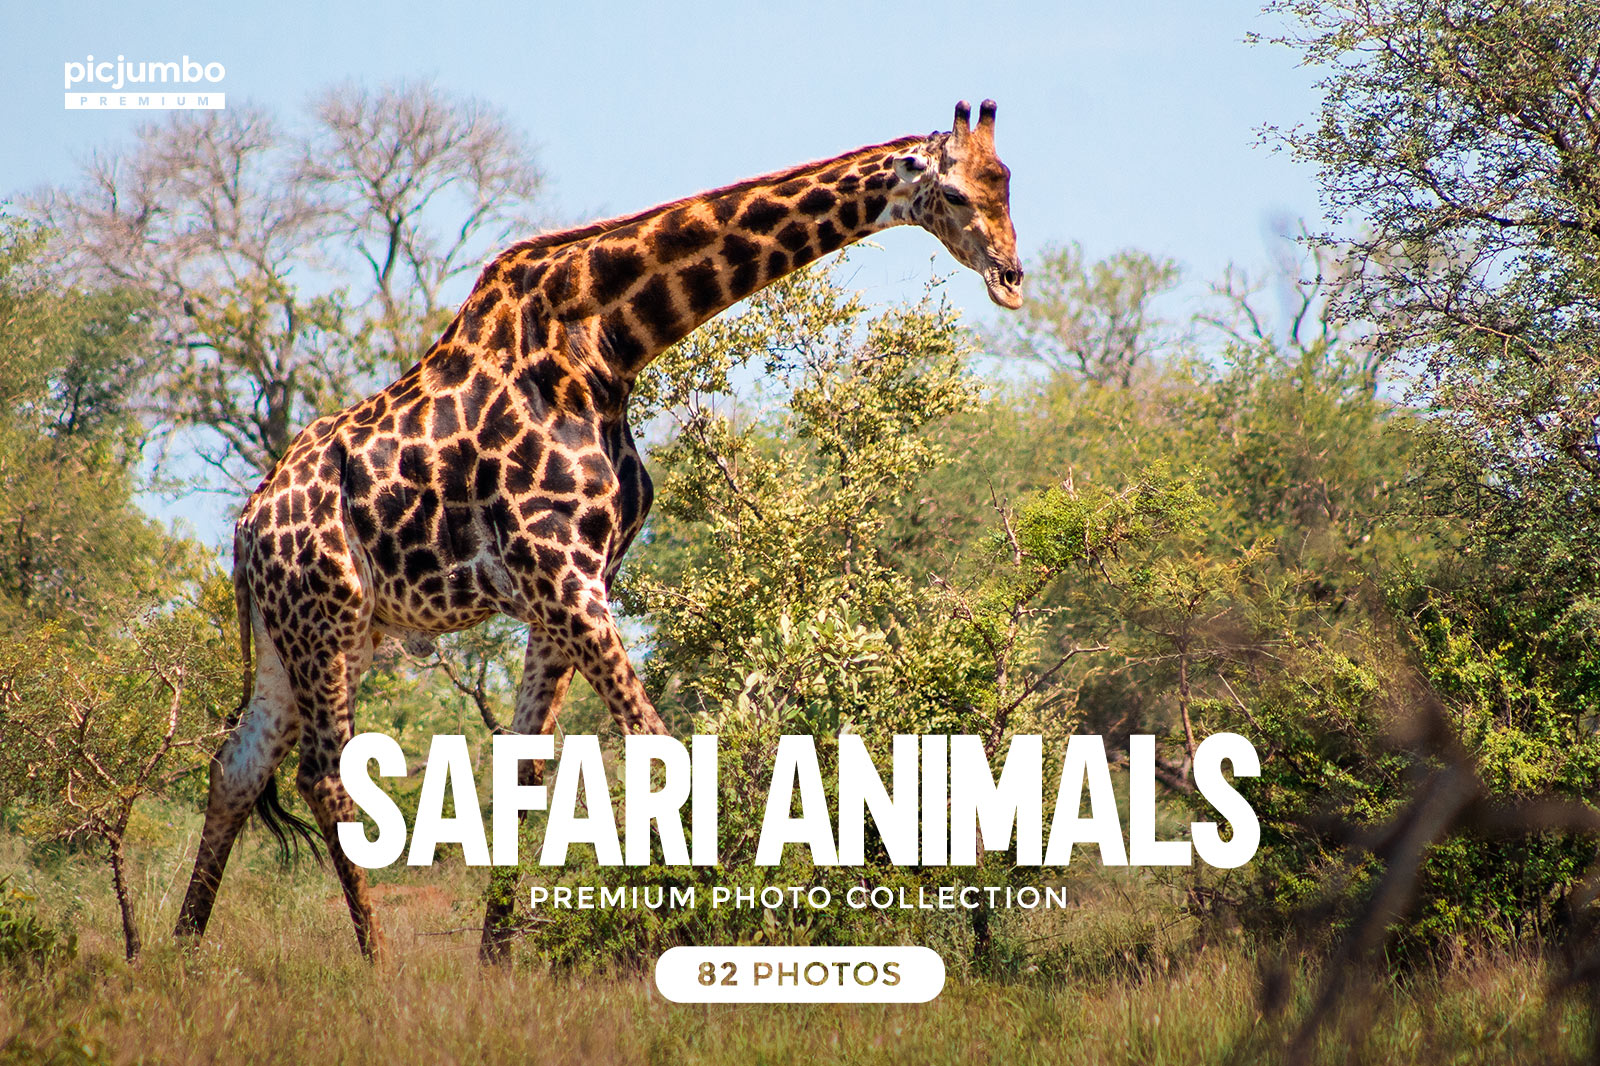 Download hi-res stock photos from our Safari Animals PREMIUM Collection!